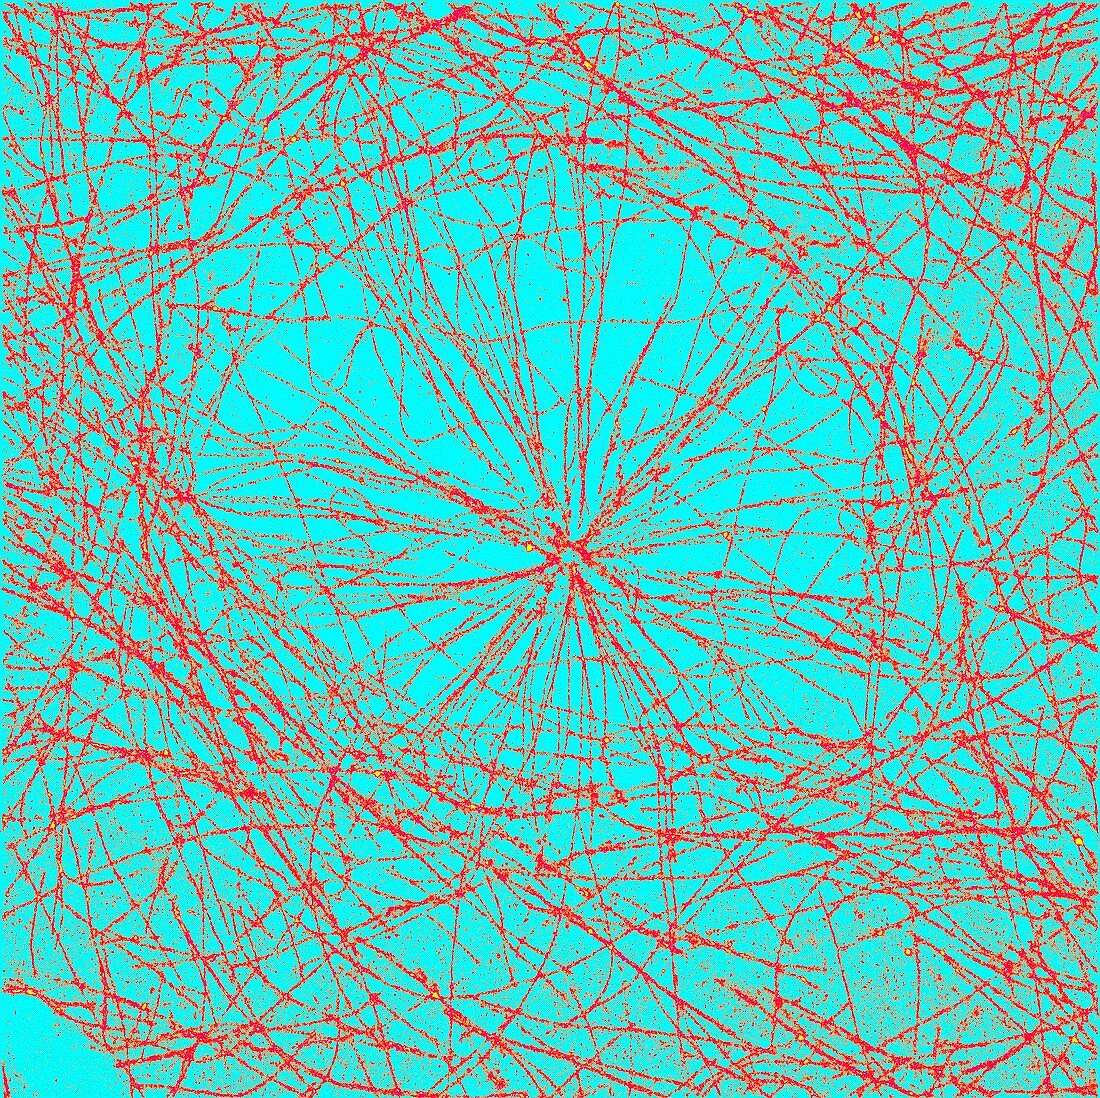 Microtubules,fluorescent micrograph